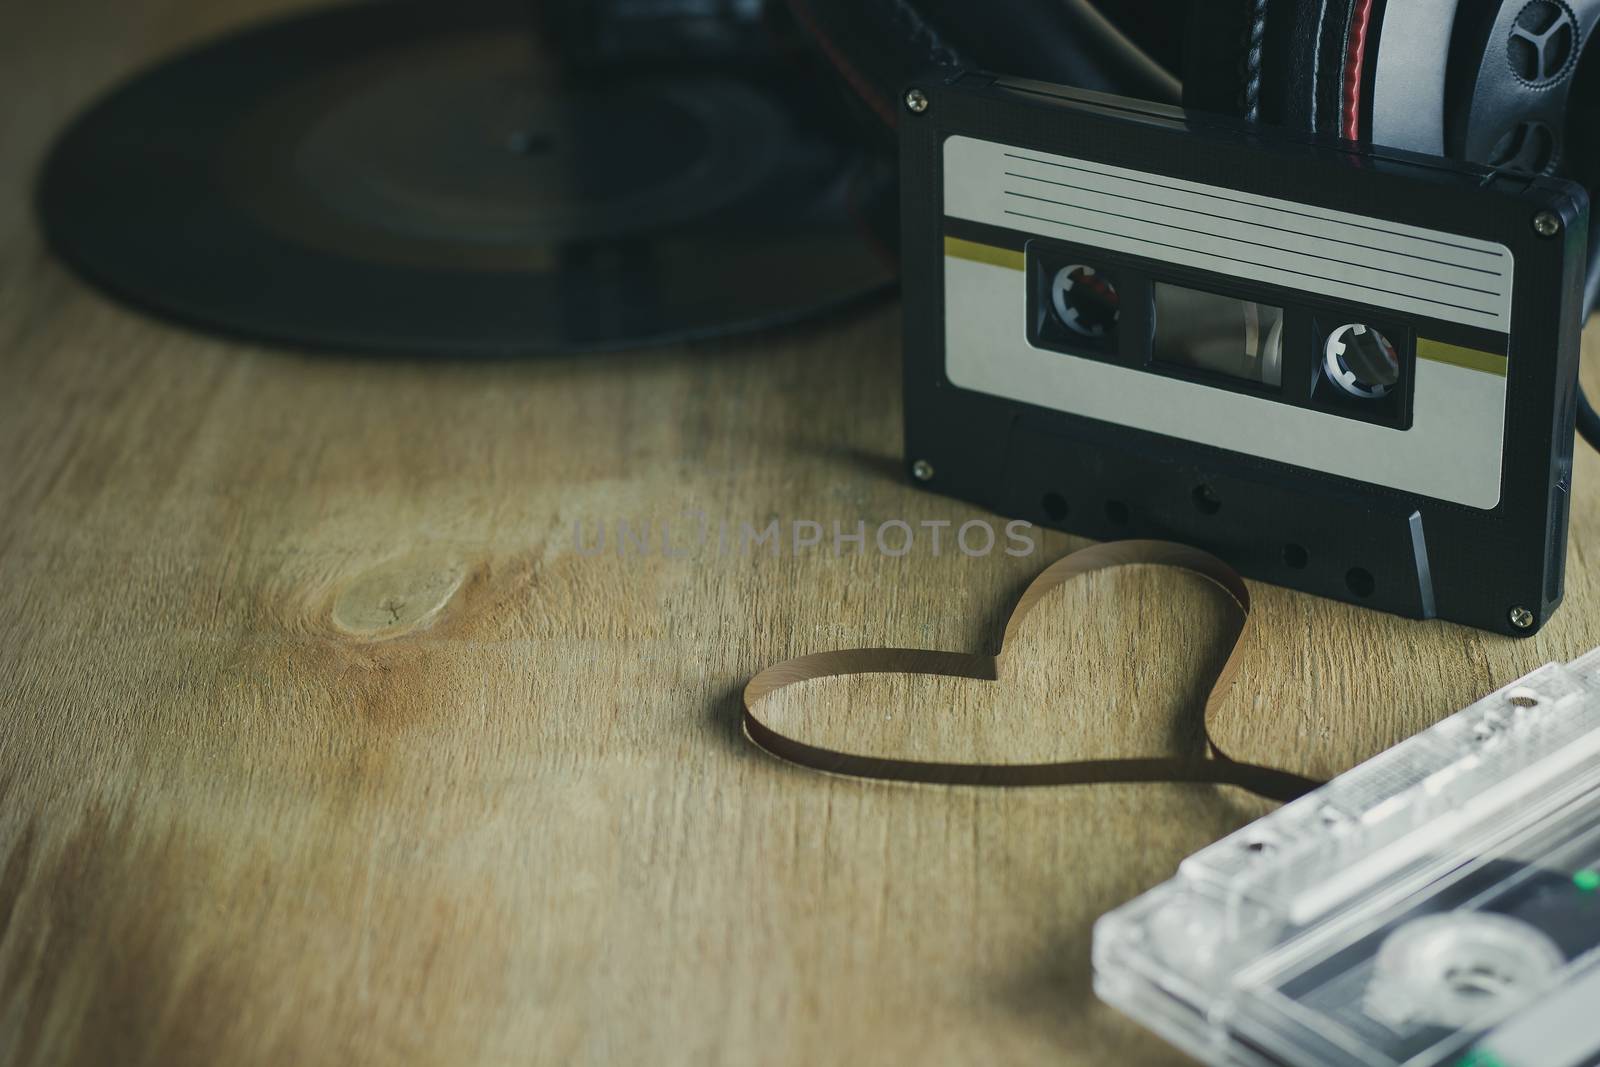 Cassette heart shaped tapes and headphone with gramophone record platter on wood background. The concept of love in music.